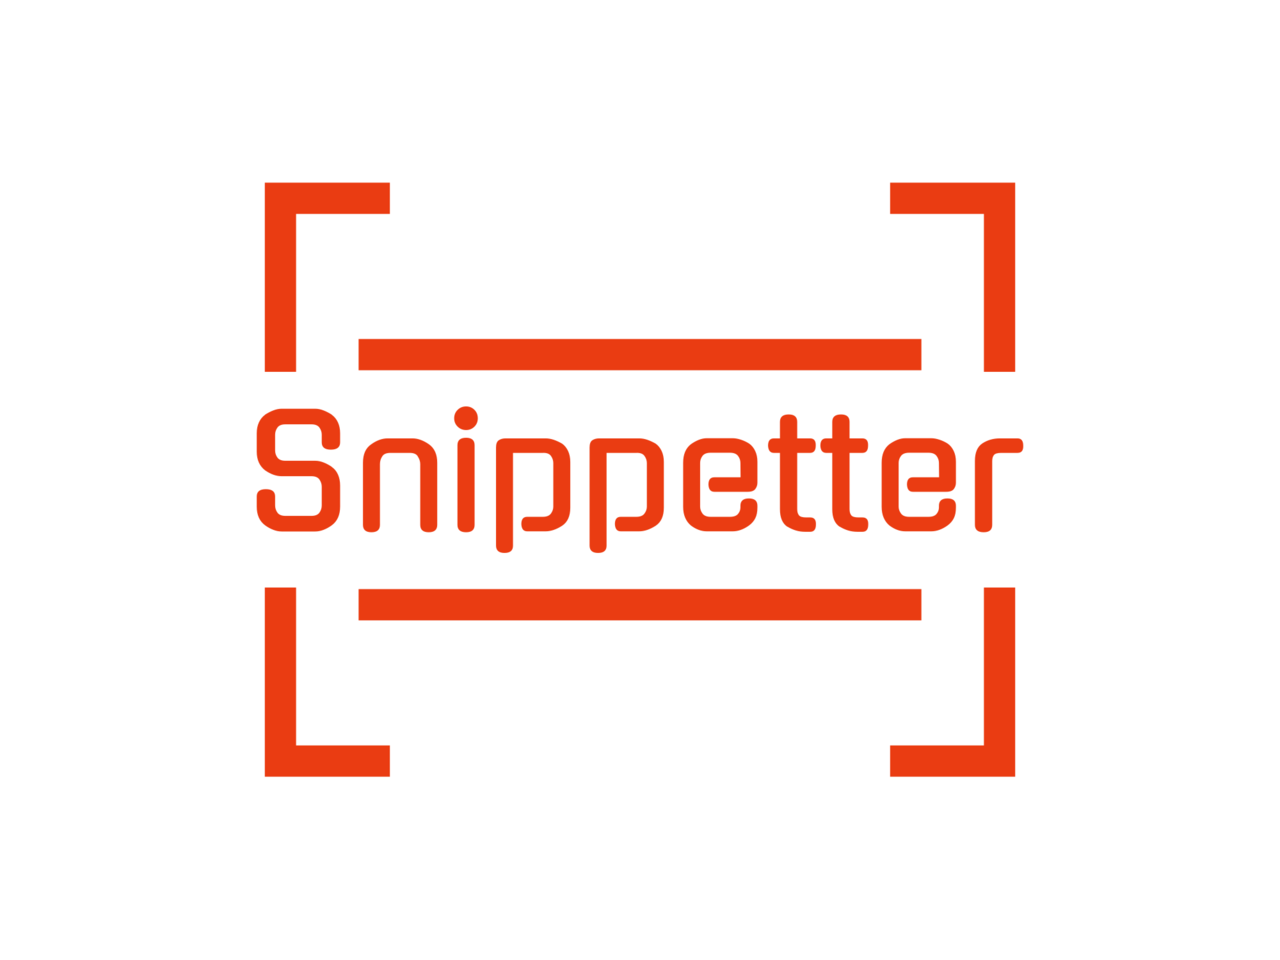 Snippetter